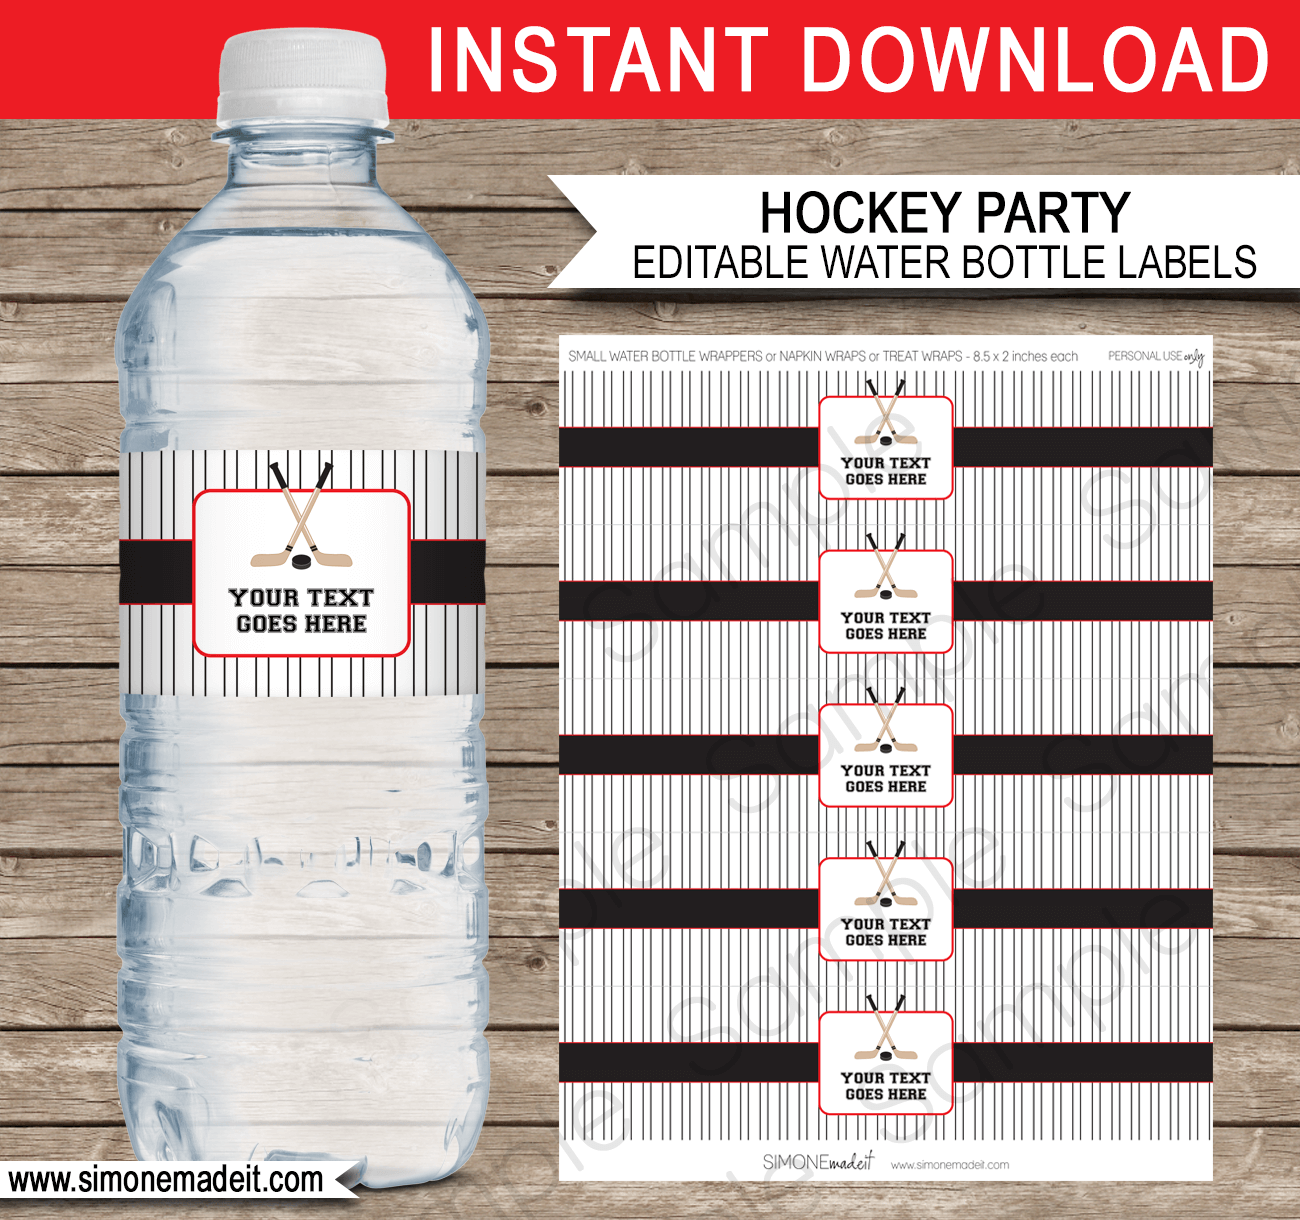 Hockey Party Water Bottle Labels | Red and Black | Birthday Party Printable Decorations | Editable DIY Template | $3.00 INSTANT DOWNLOAD via SIMONEmadeit.com